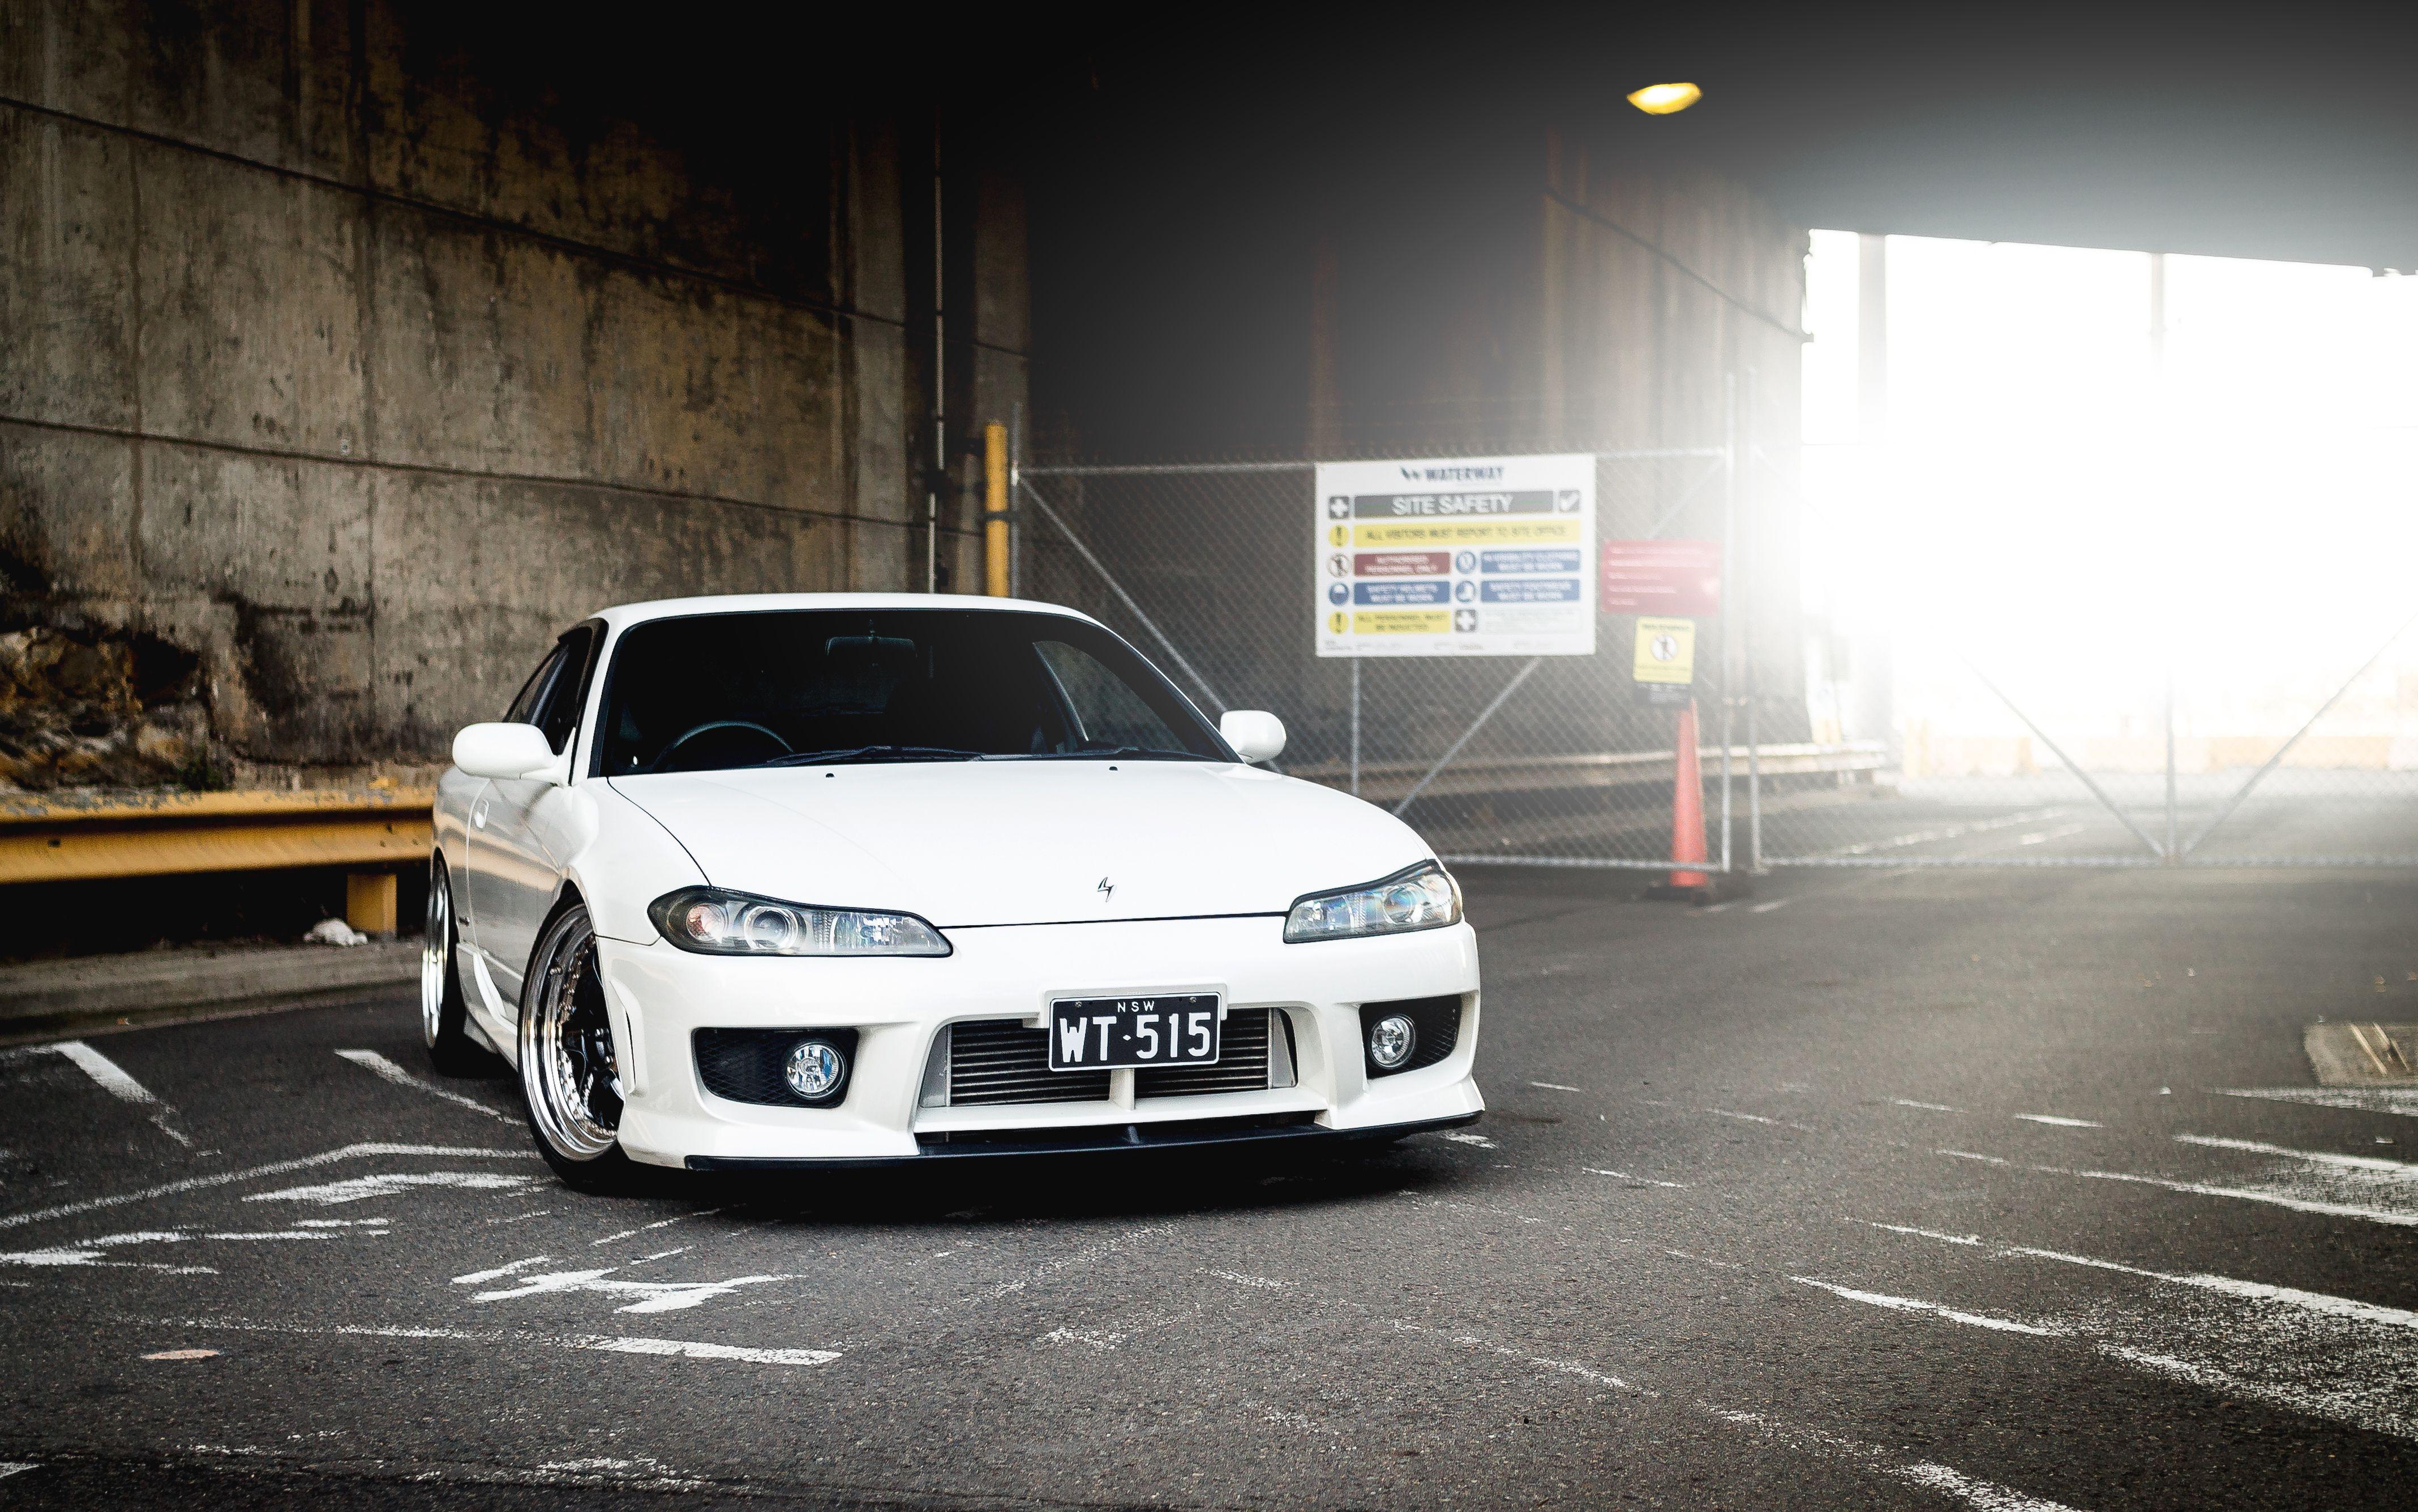 Nissan Silvia S15 Wallpapers Top Free Nissan Silvia S15 Backgrounds Wallpaperaccess